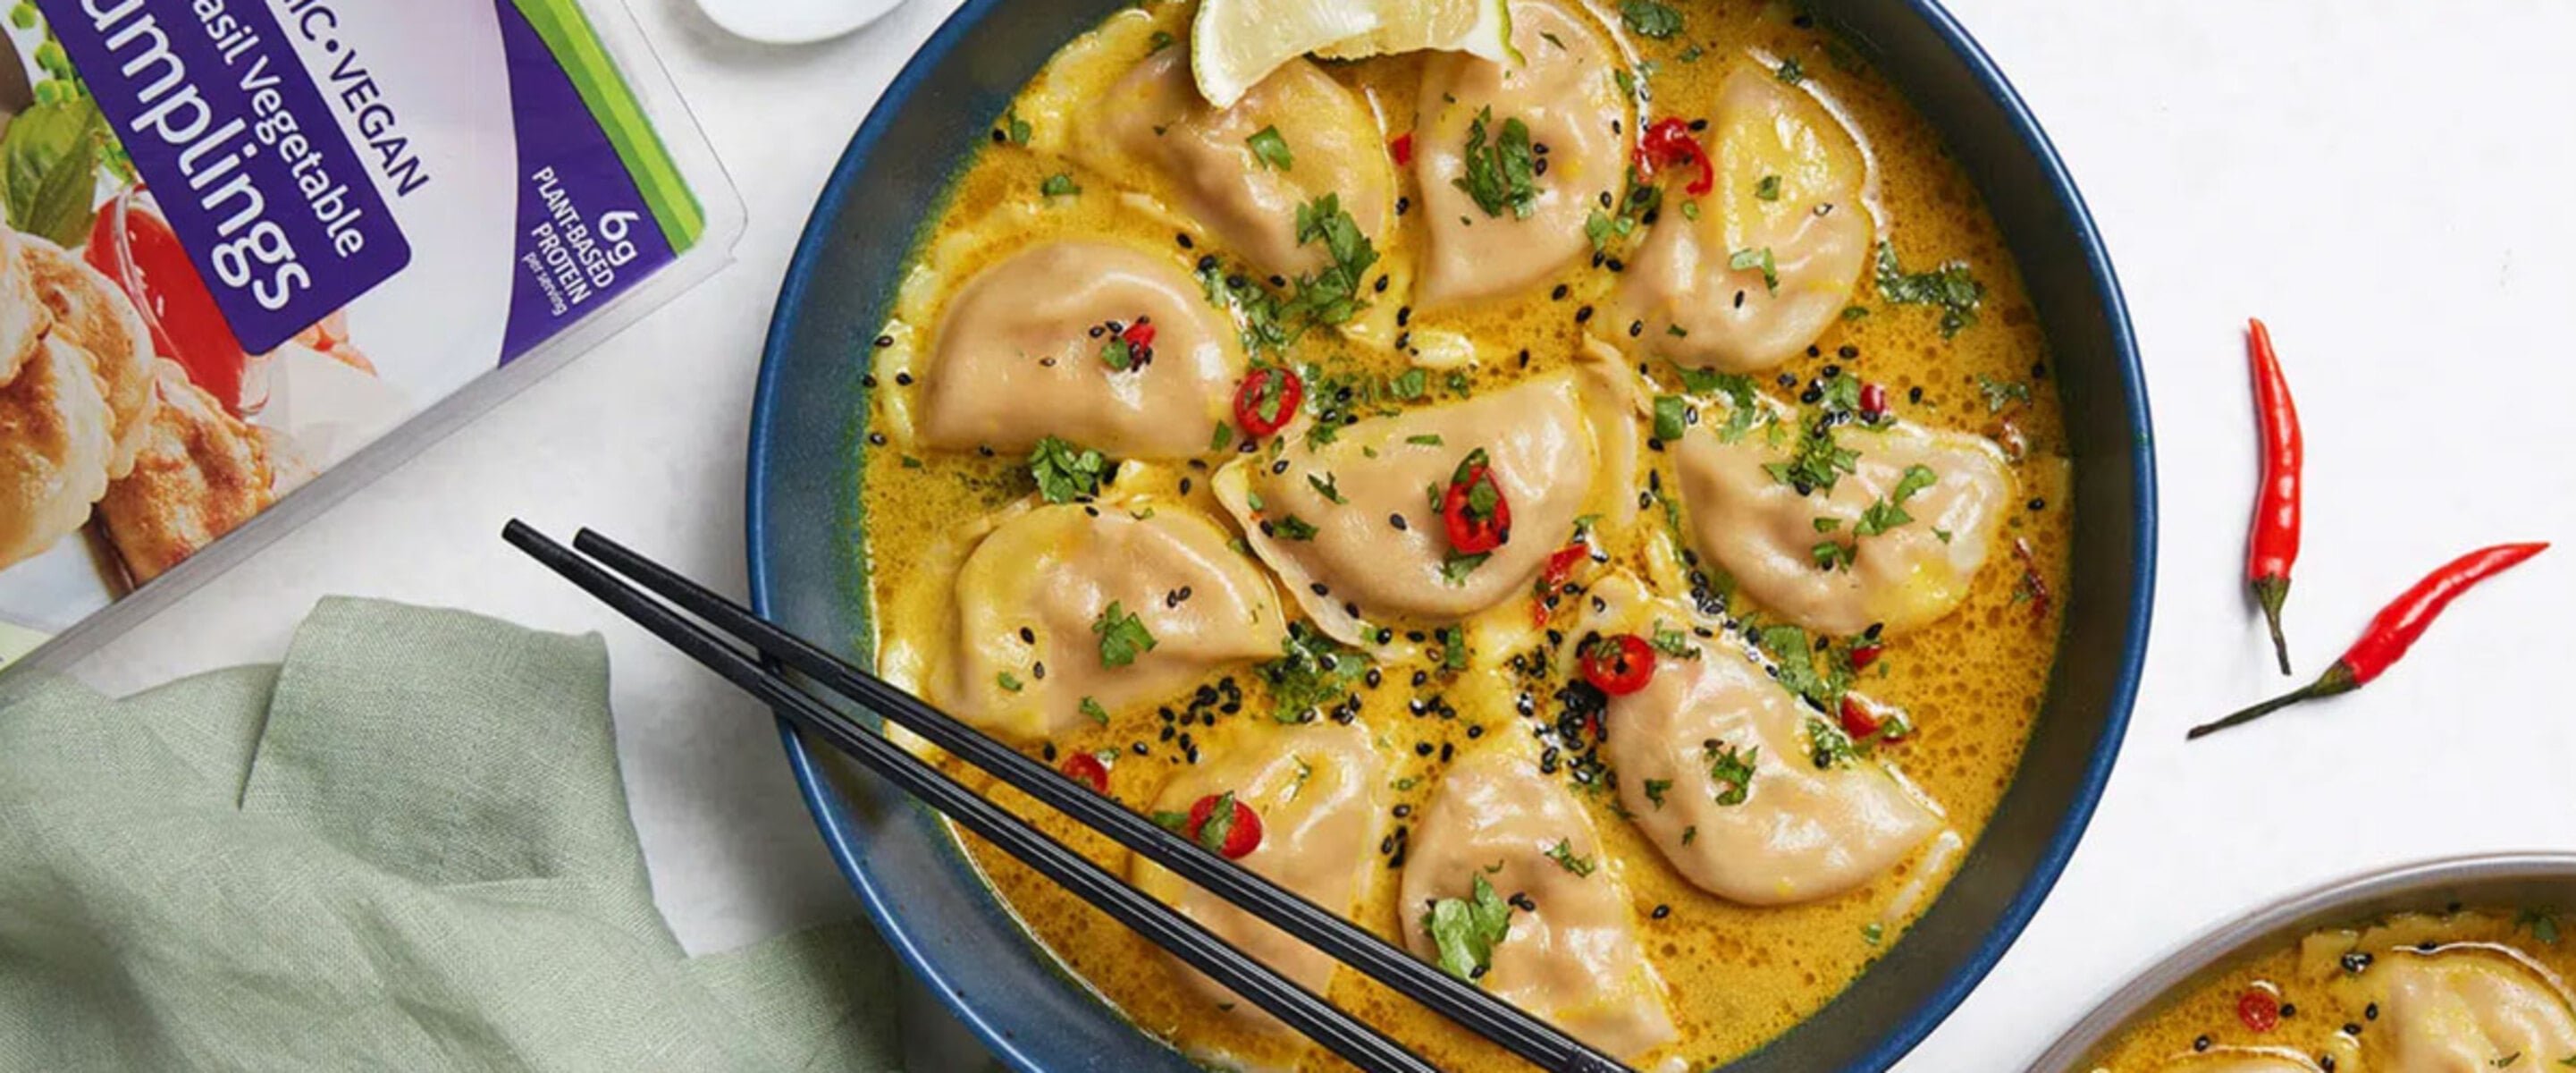 Get Your Dumpling Fix: Delicious Recipes and the Best Store-Bought Options